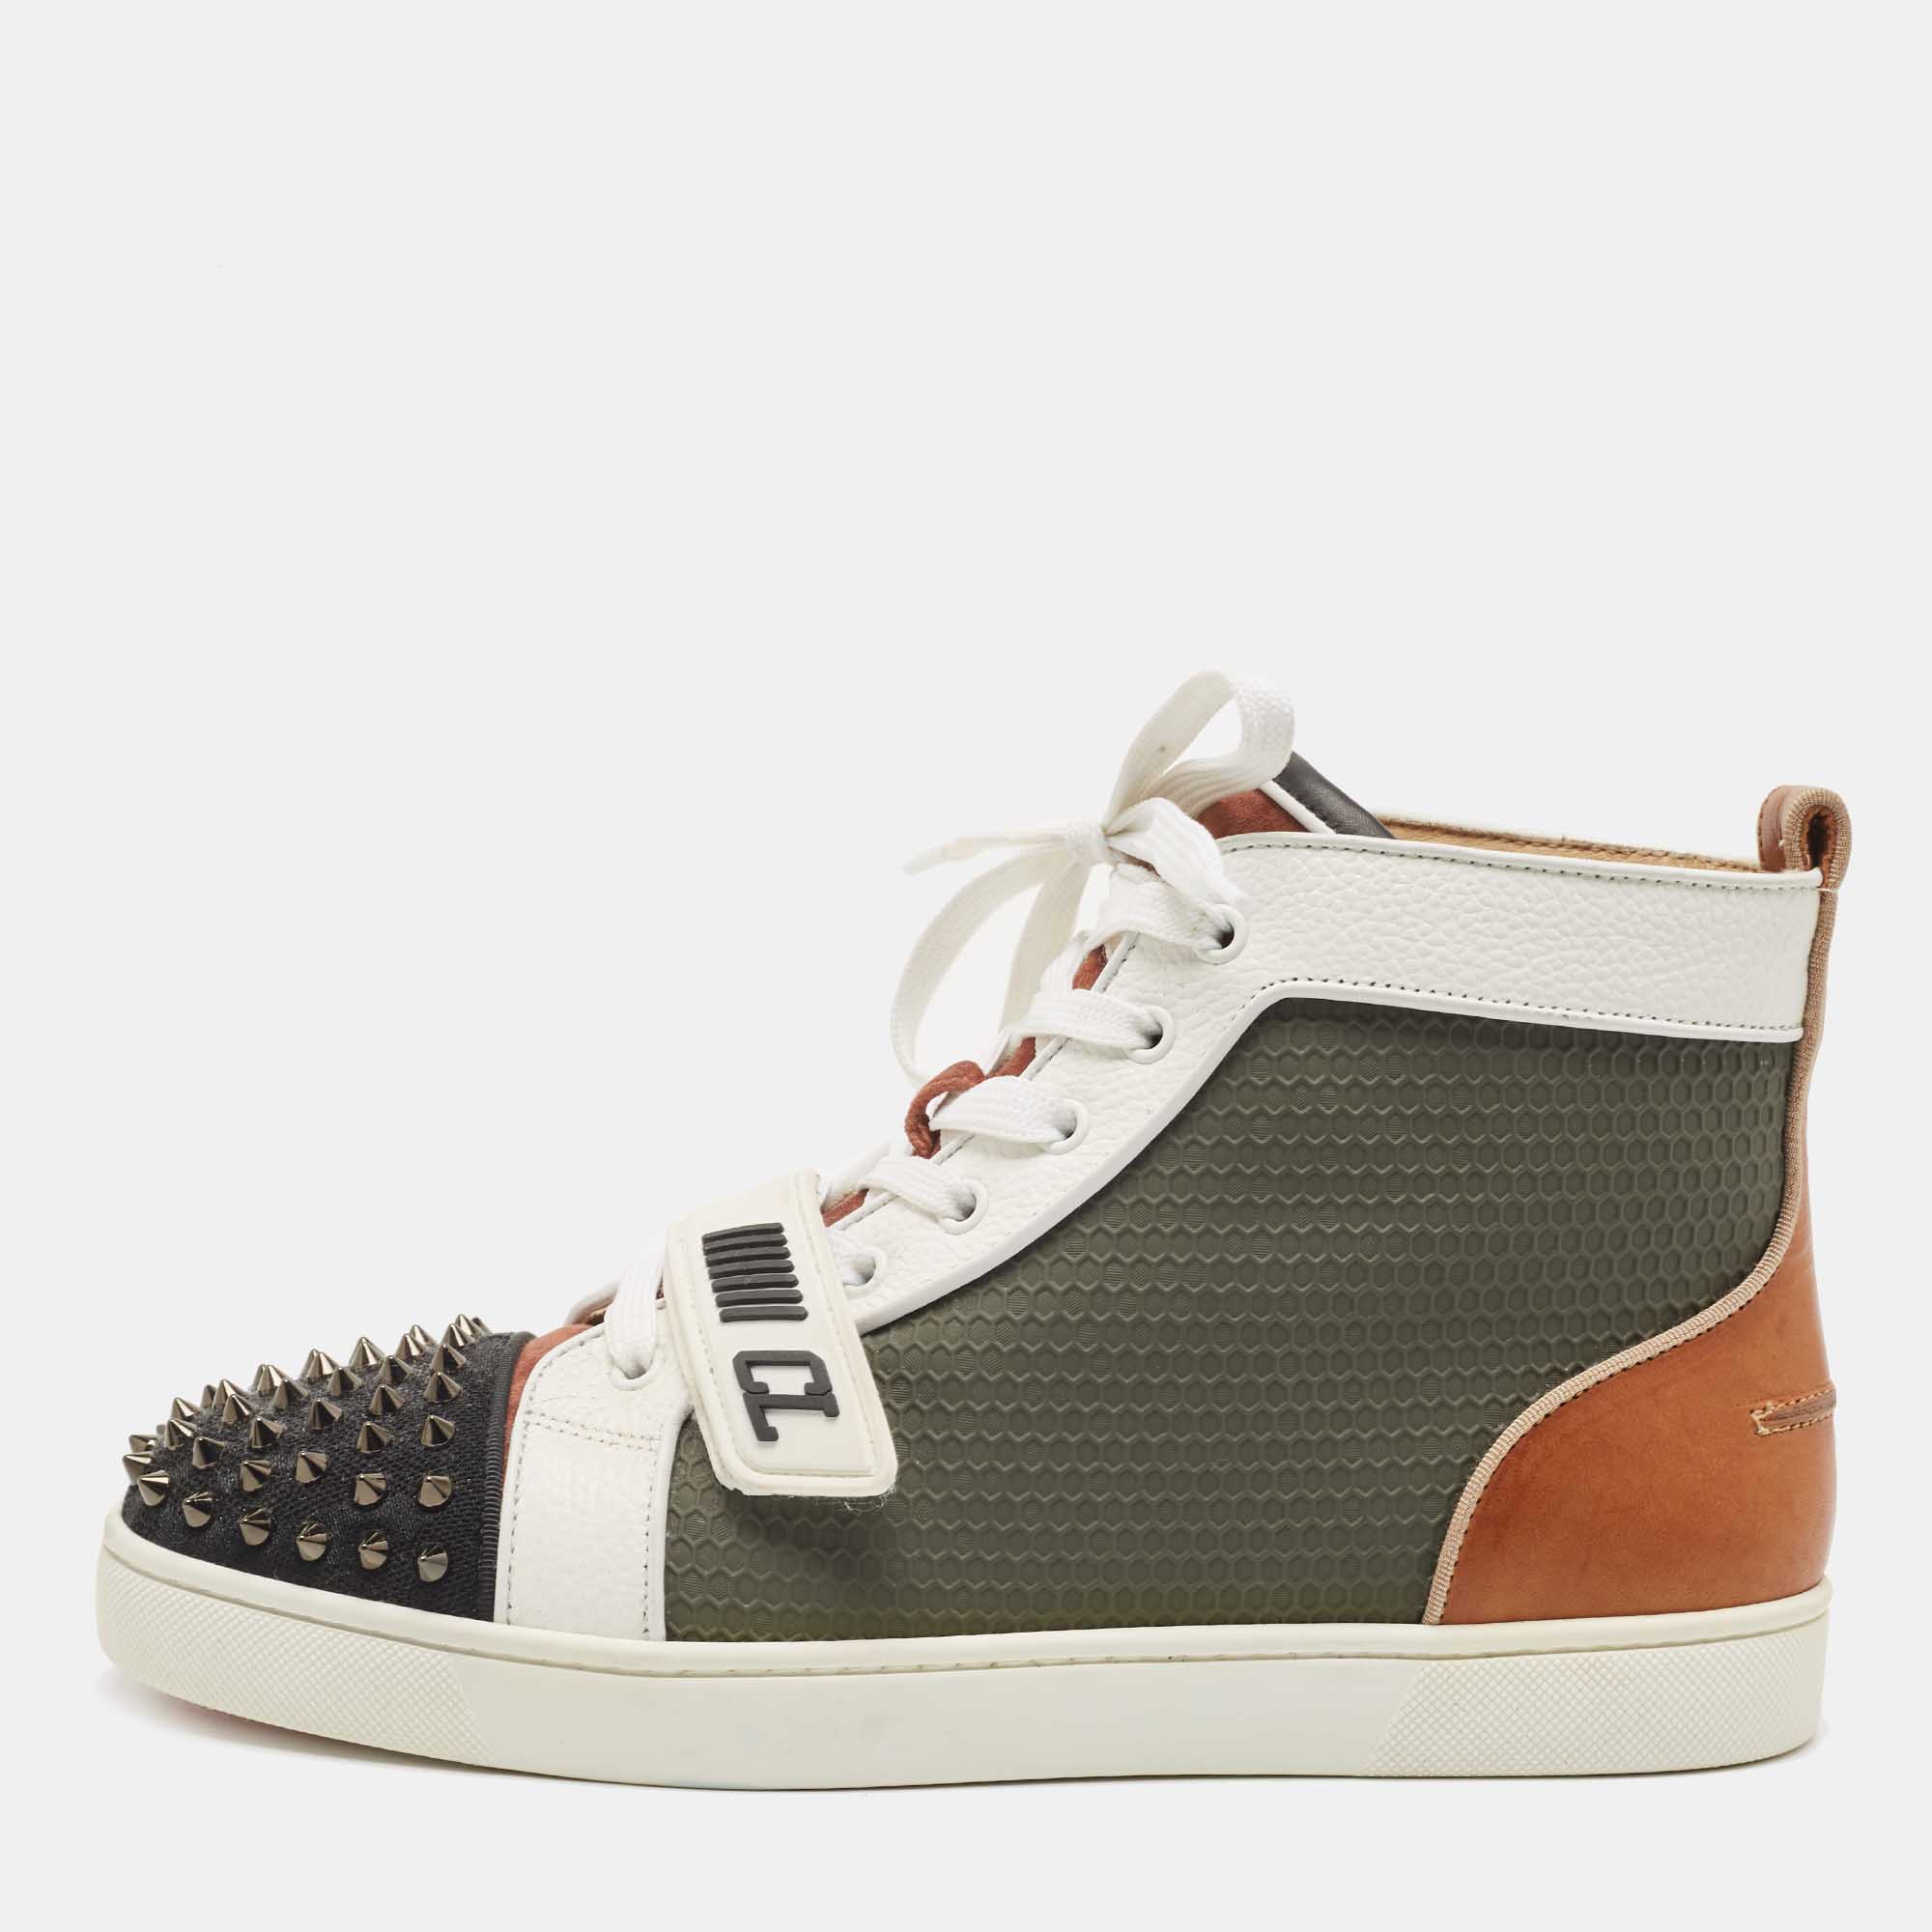 Christian Louboutin Green Suede Leather Louis Spikes High Top